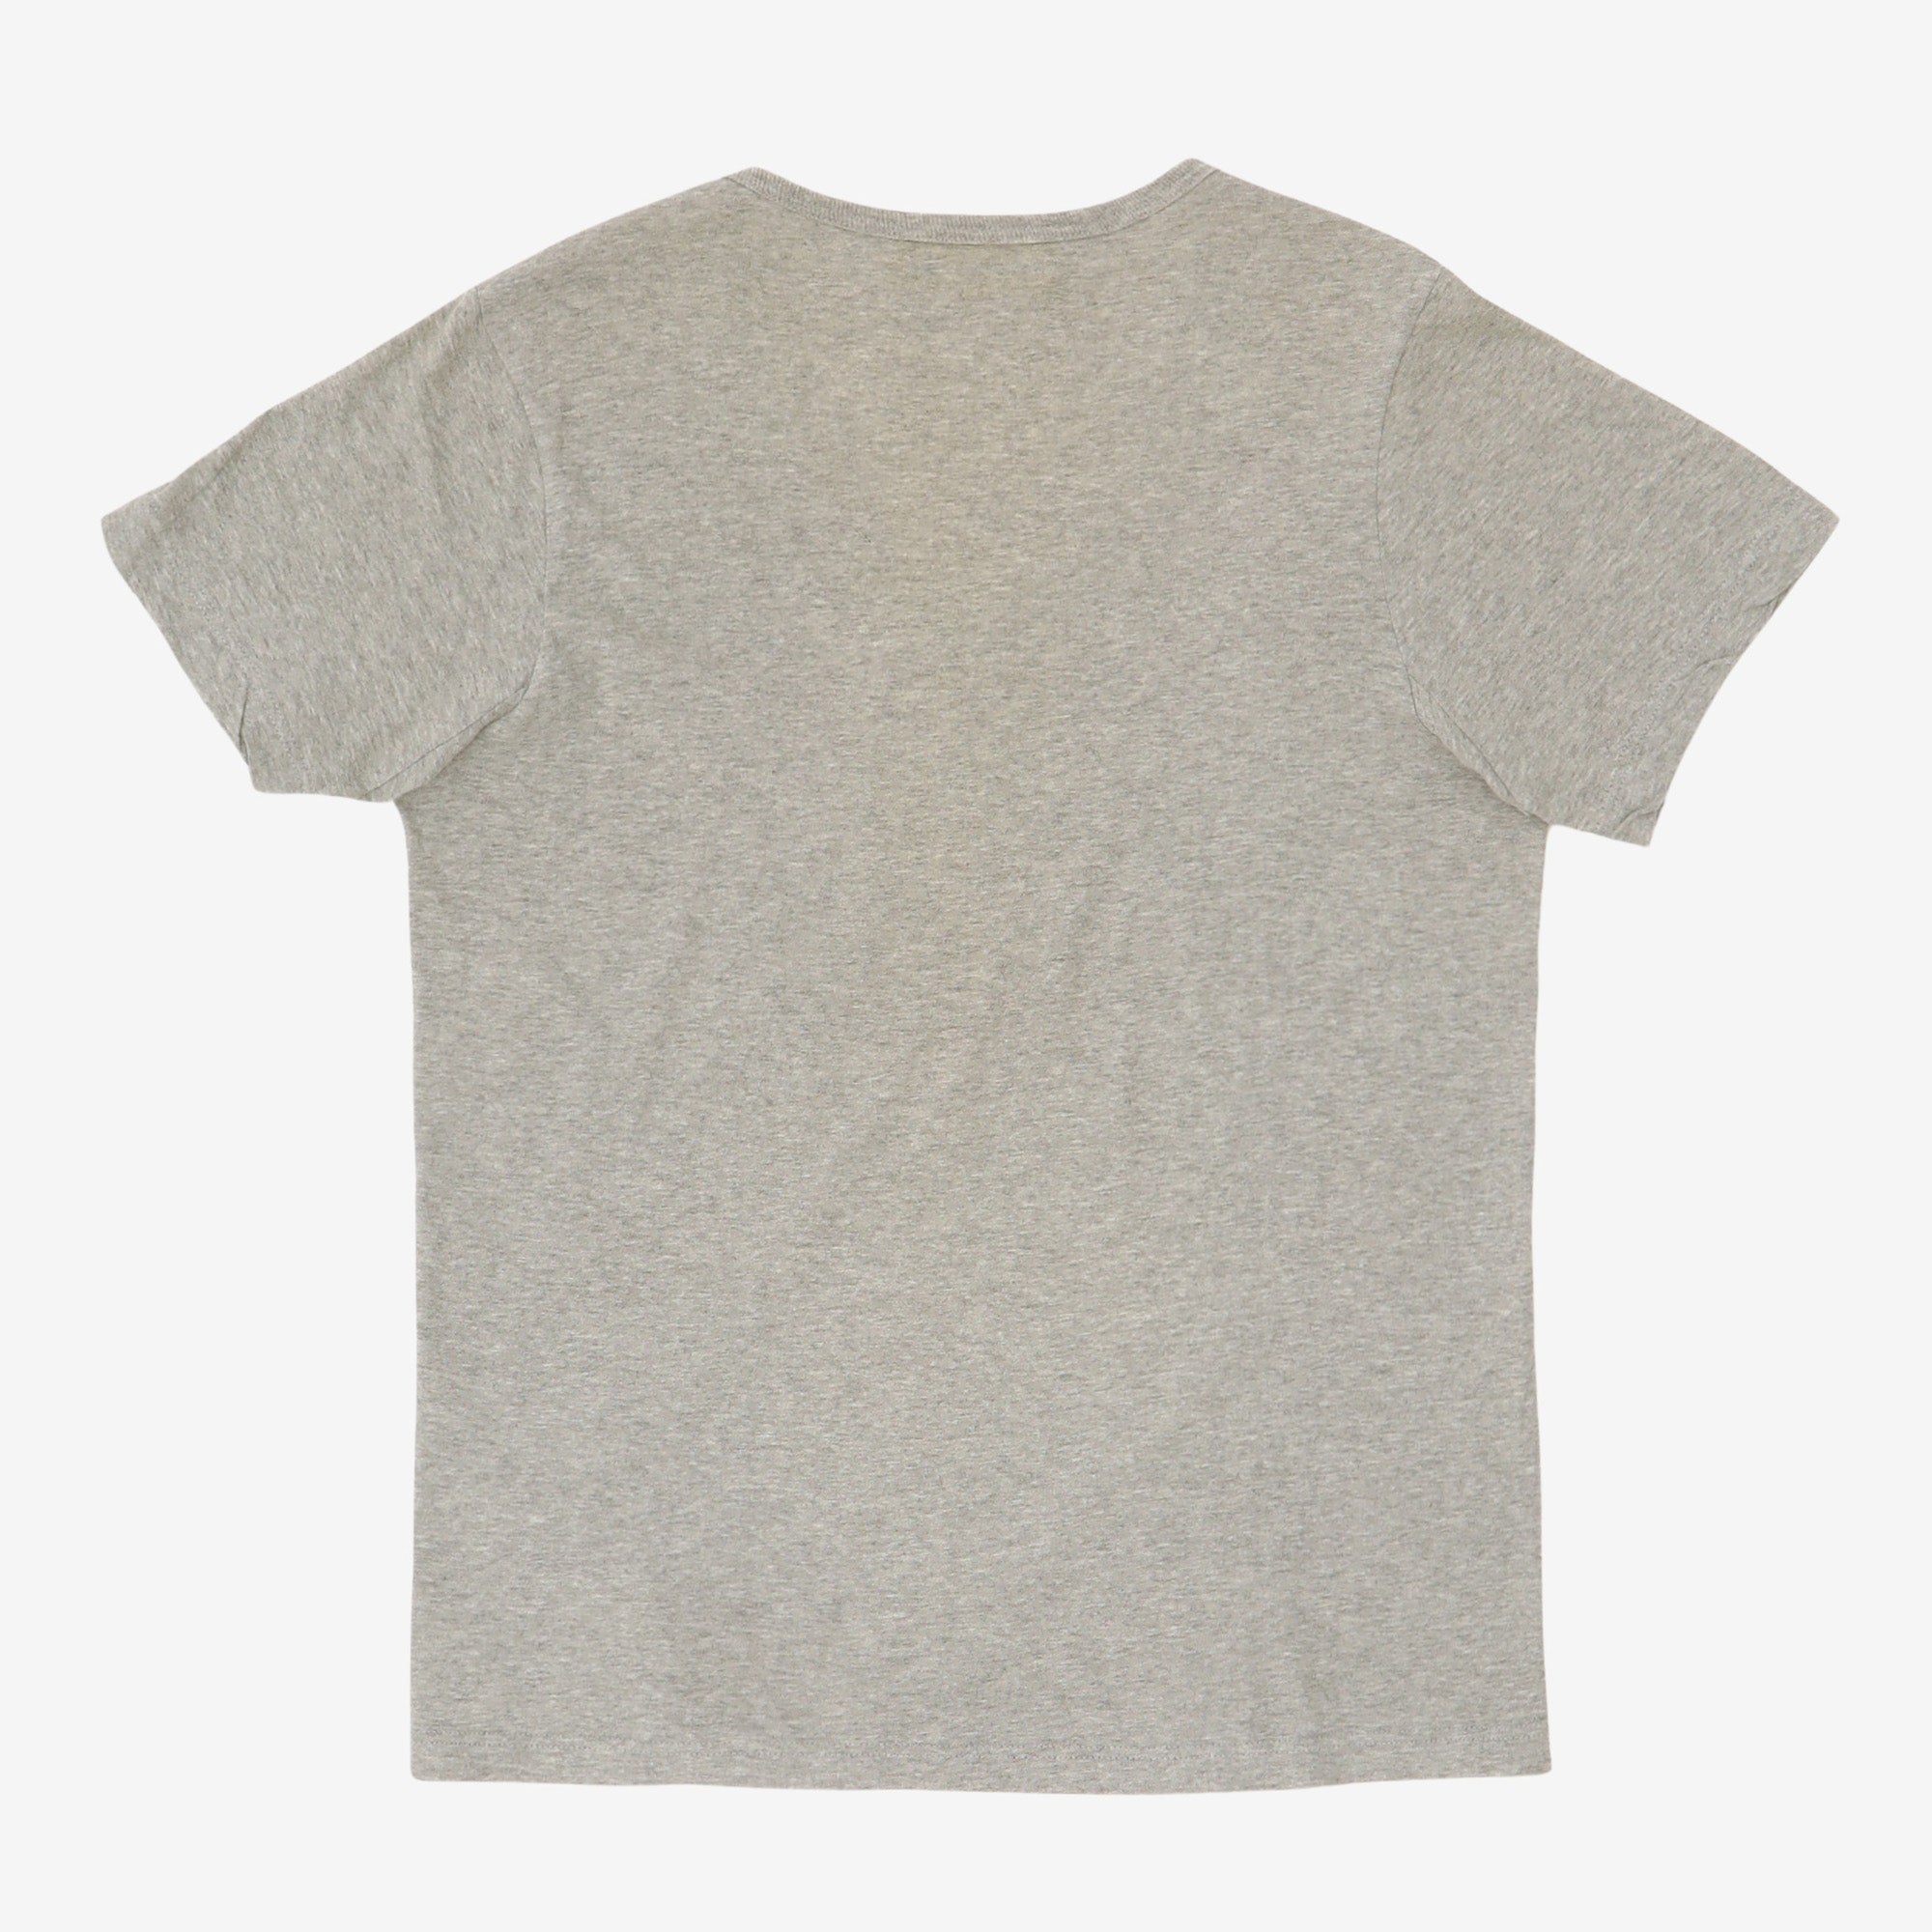 Stretched Neck T-Shirt